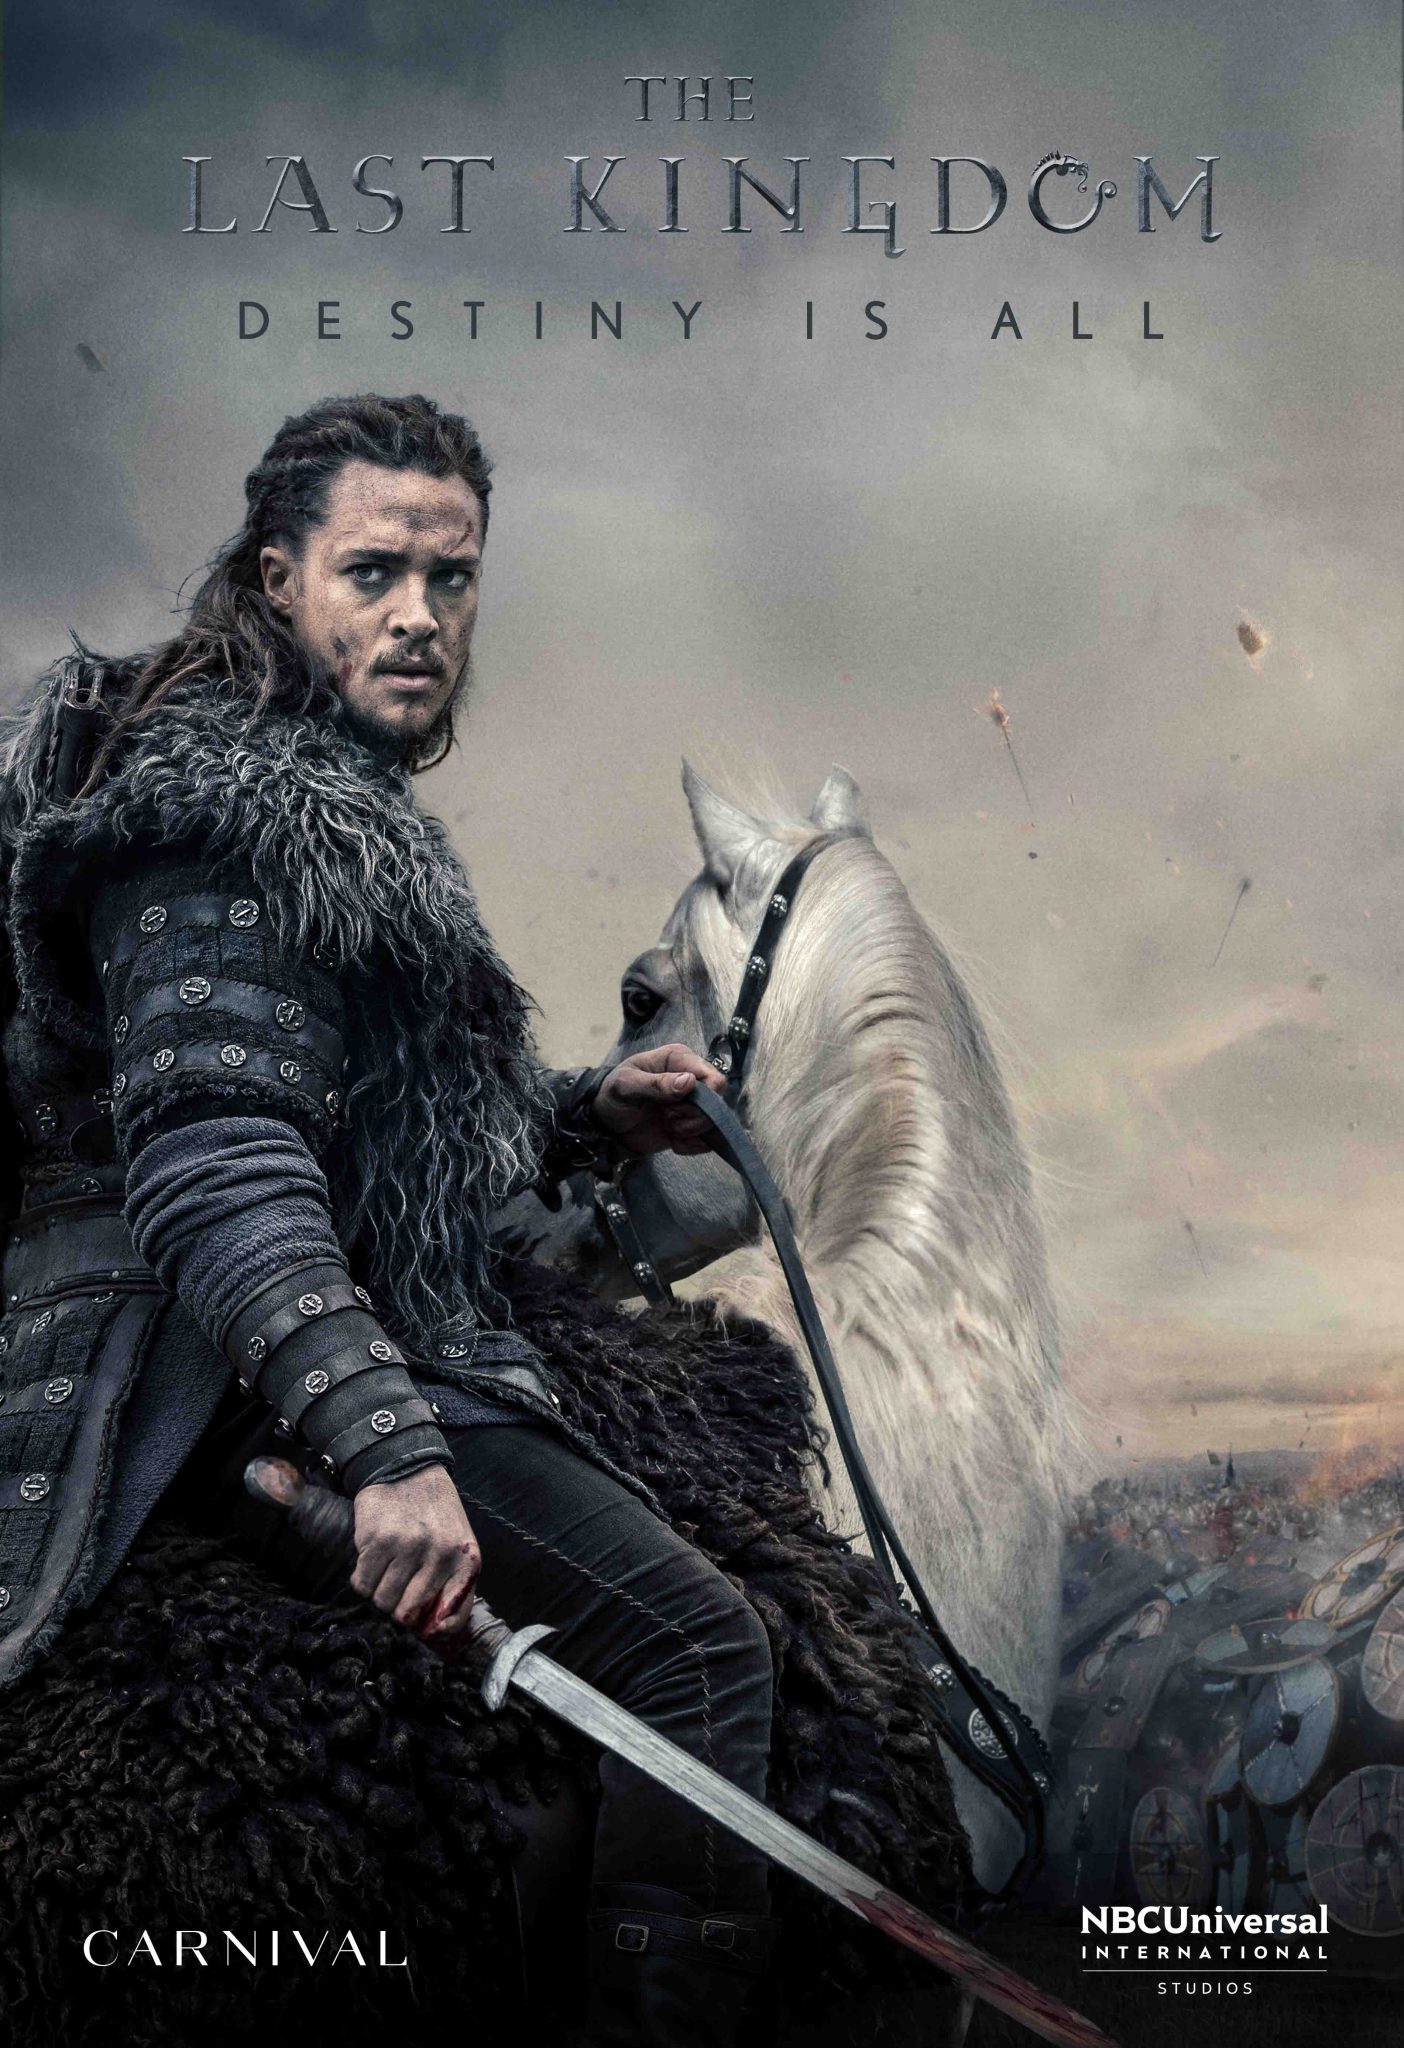 Jalic Blades to Produce Replica of Uhtred’s Iconic Sword From ‘The Last Kingdom’ image